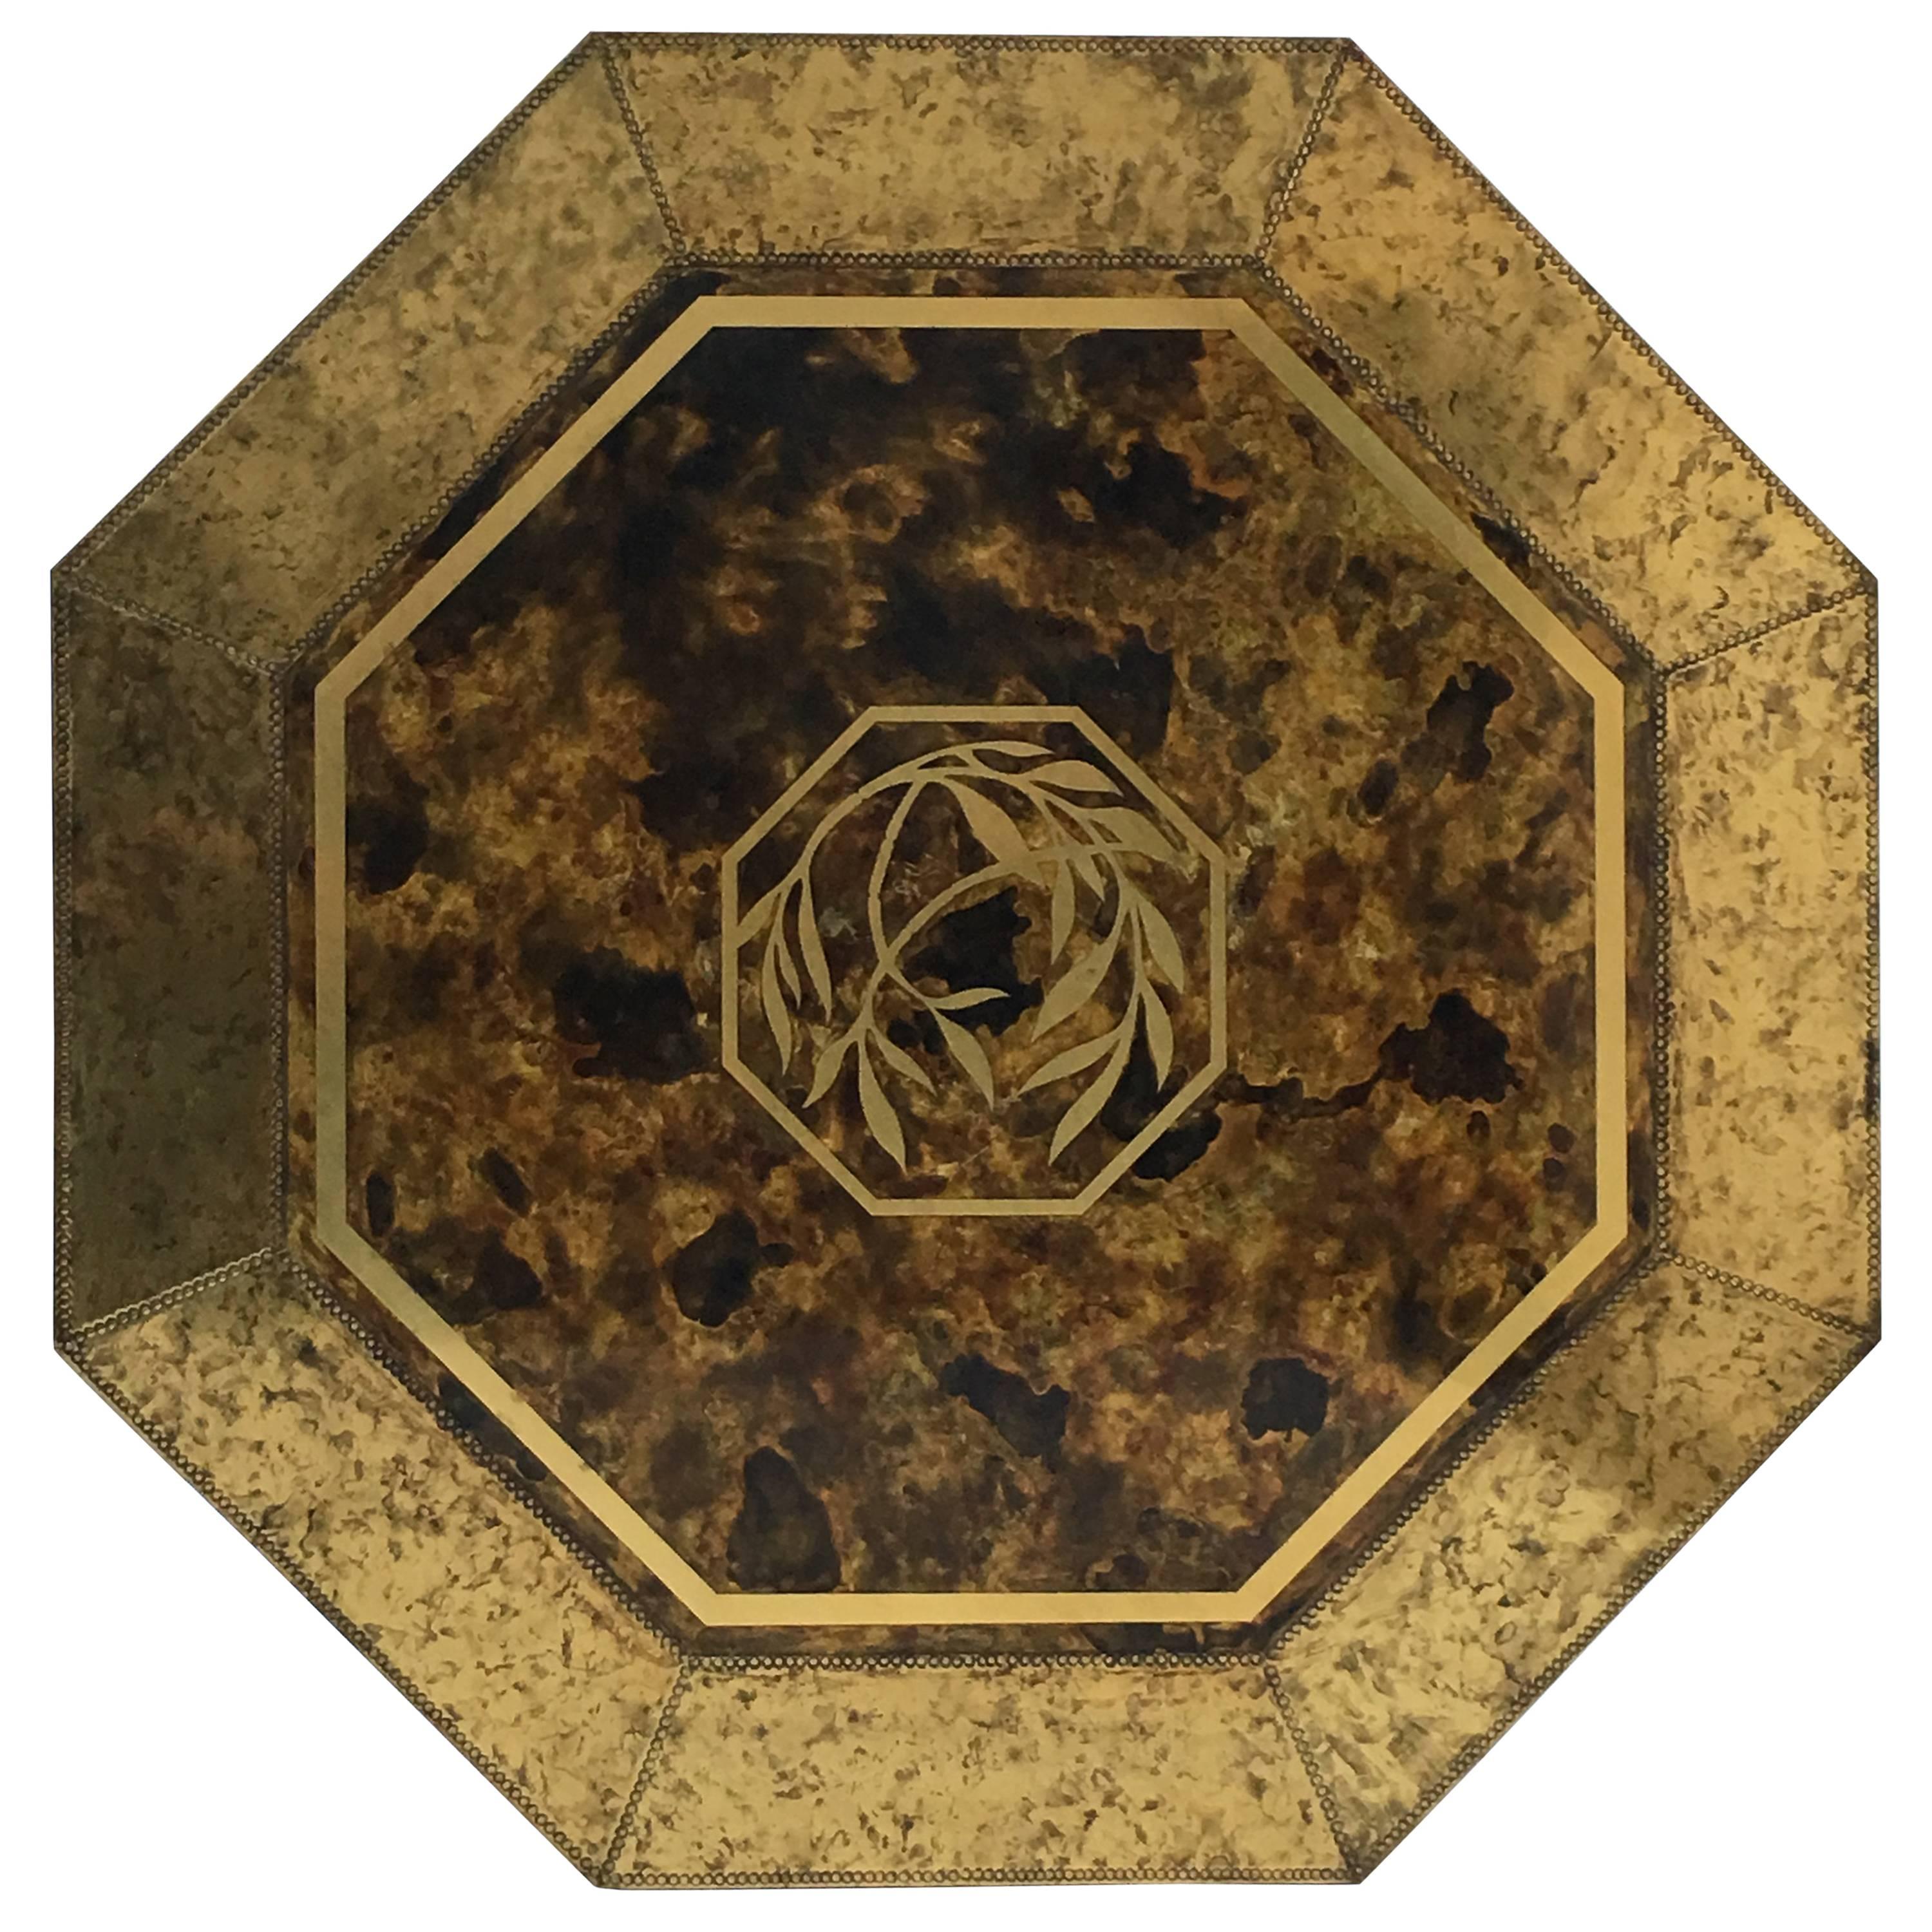 Stunning 1970s 'Mastercraft', Acid Etched Brass Table by Sculptor Bernhard Rohne For Sale